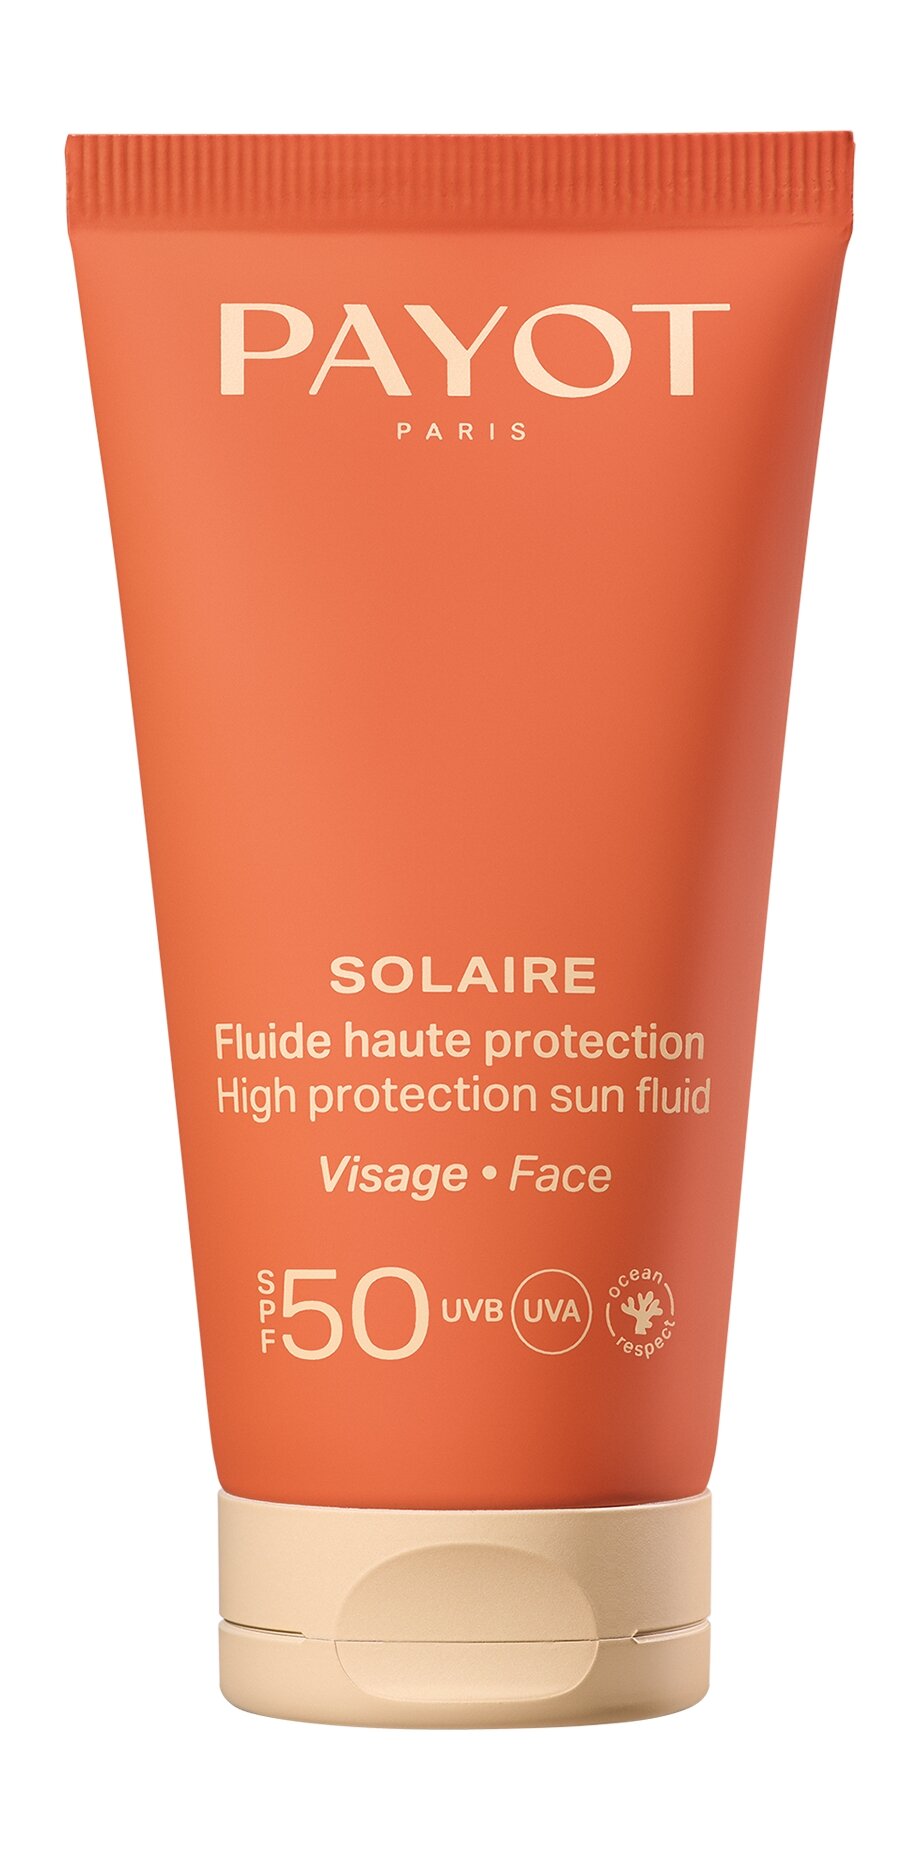 PAYOT Solaire Fluide Haute Protection Флюид для лица солнцезащитный SPF 50, 50 мл